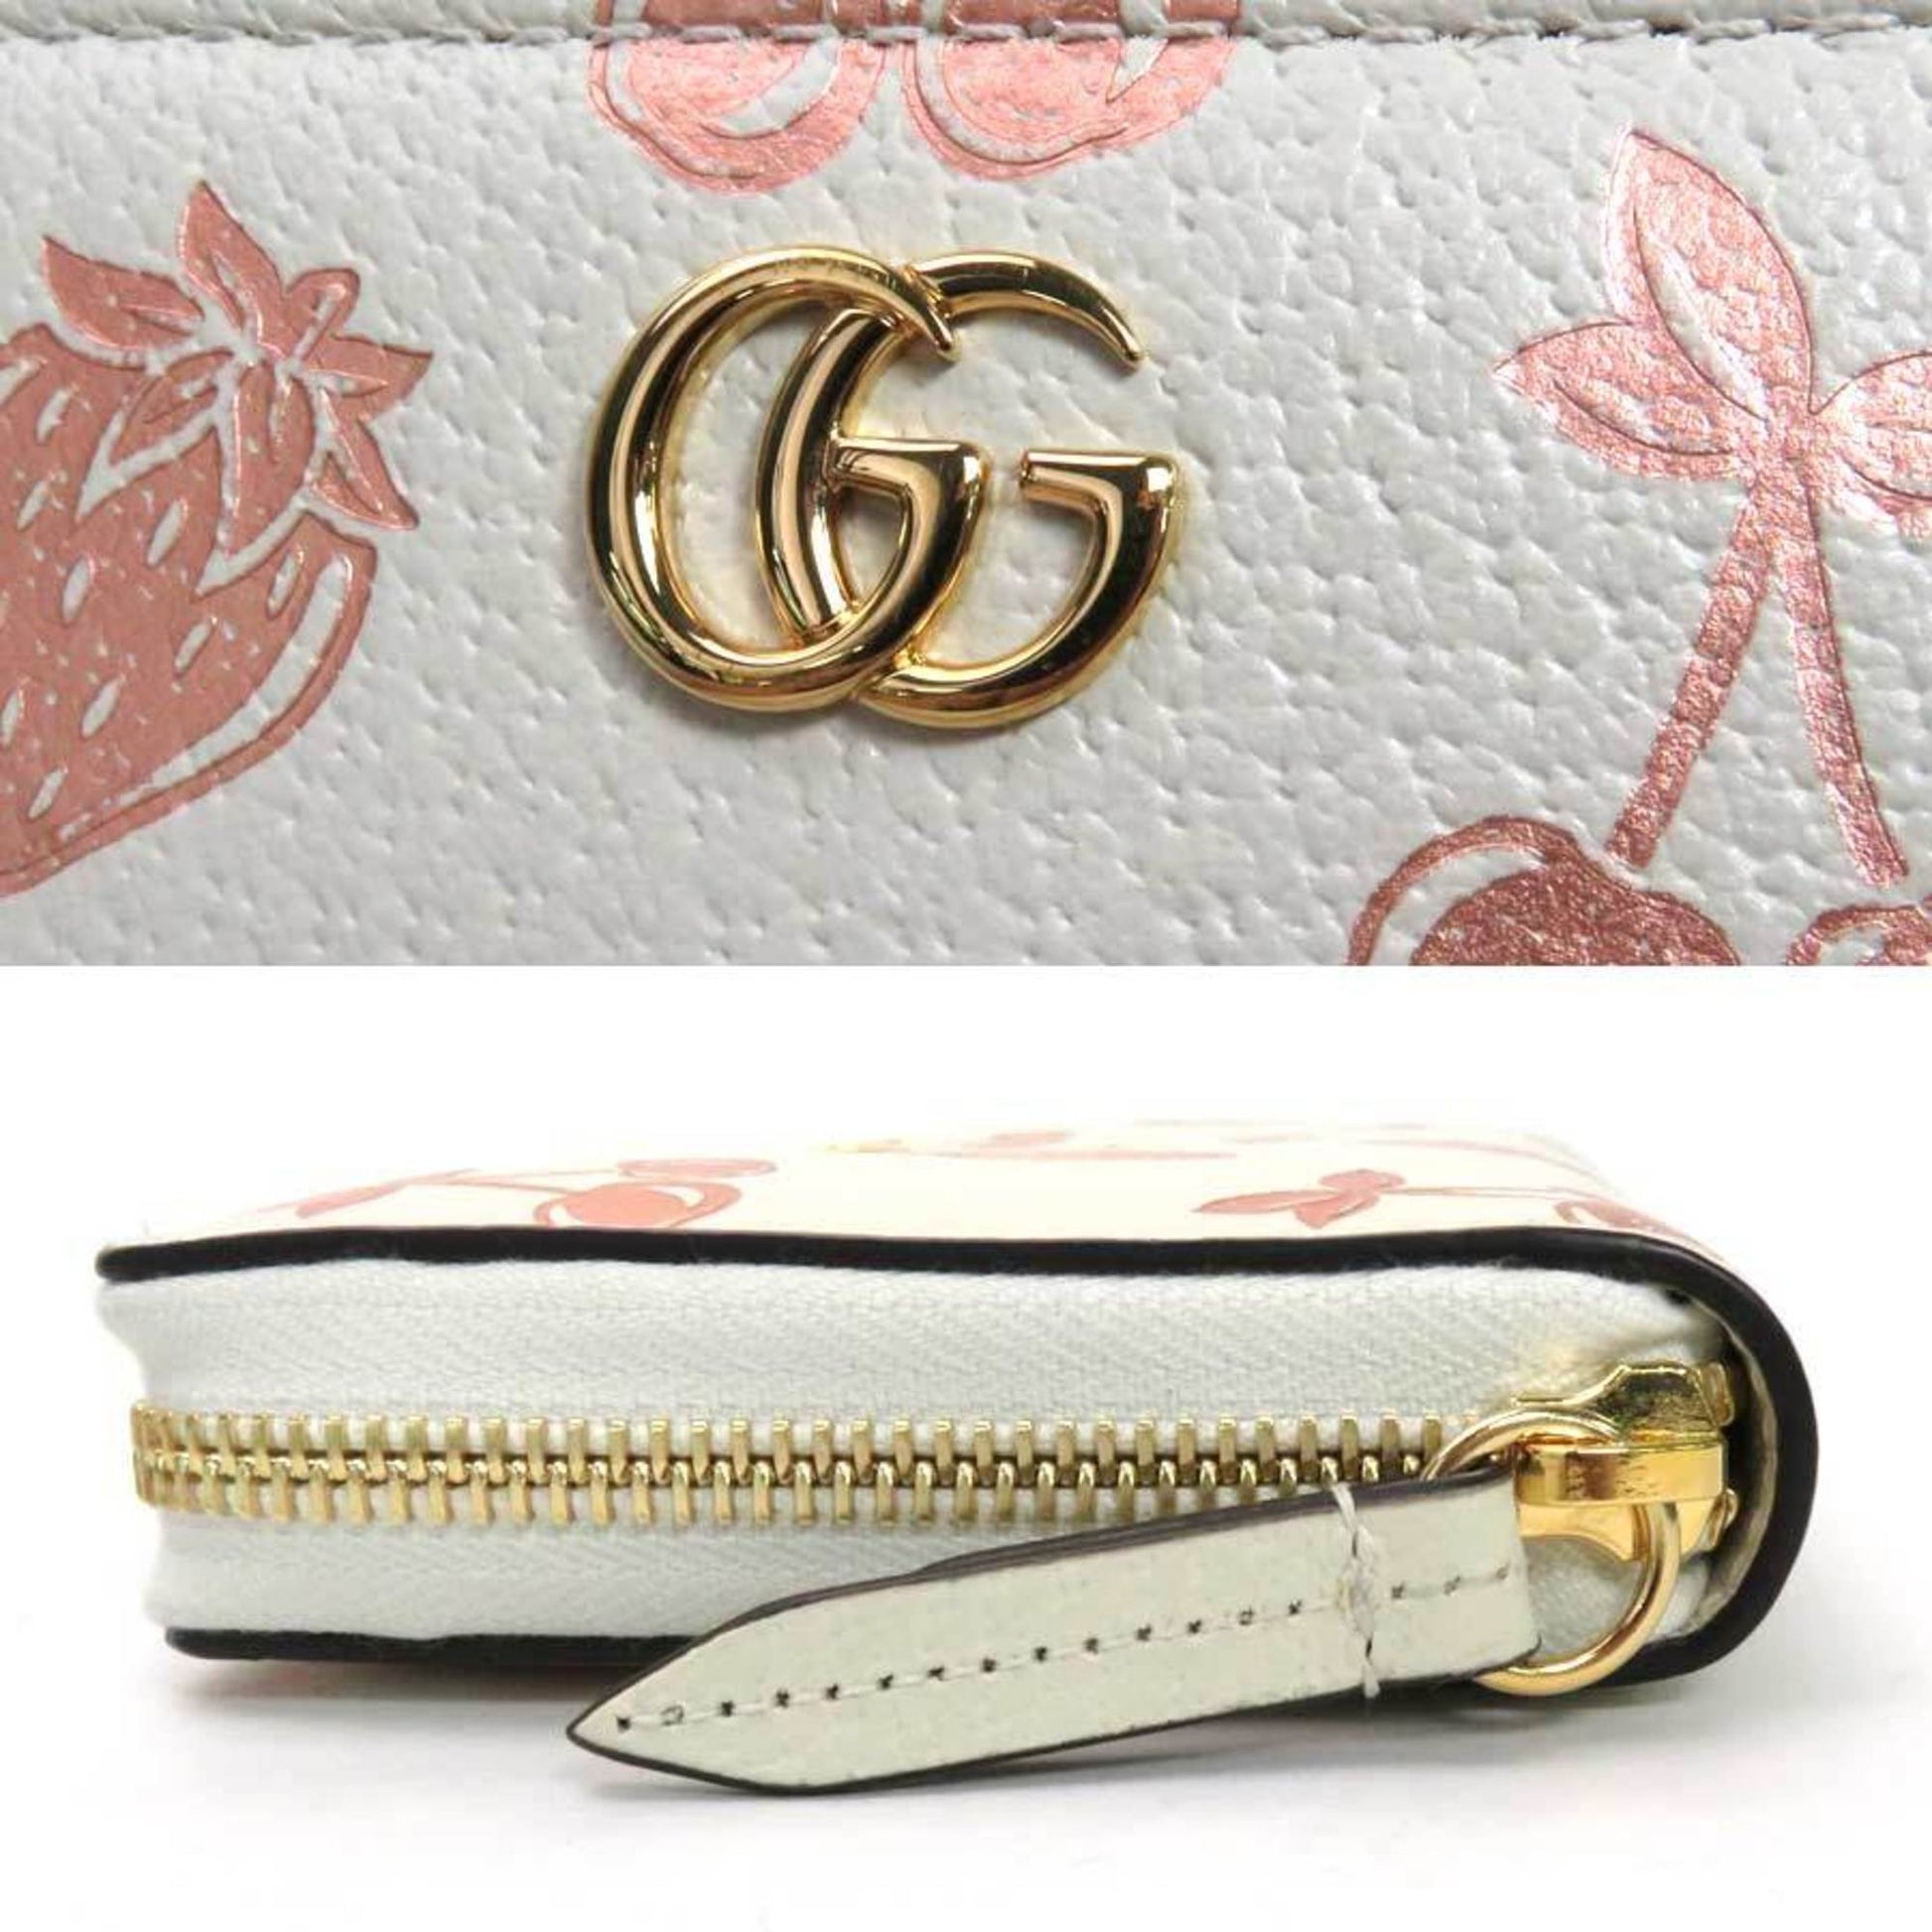 Gucci Lovely Leather Long Wallet (SHG-32706) – LuxeDH